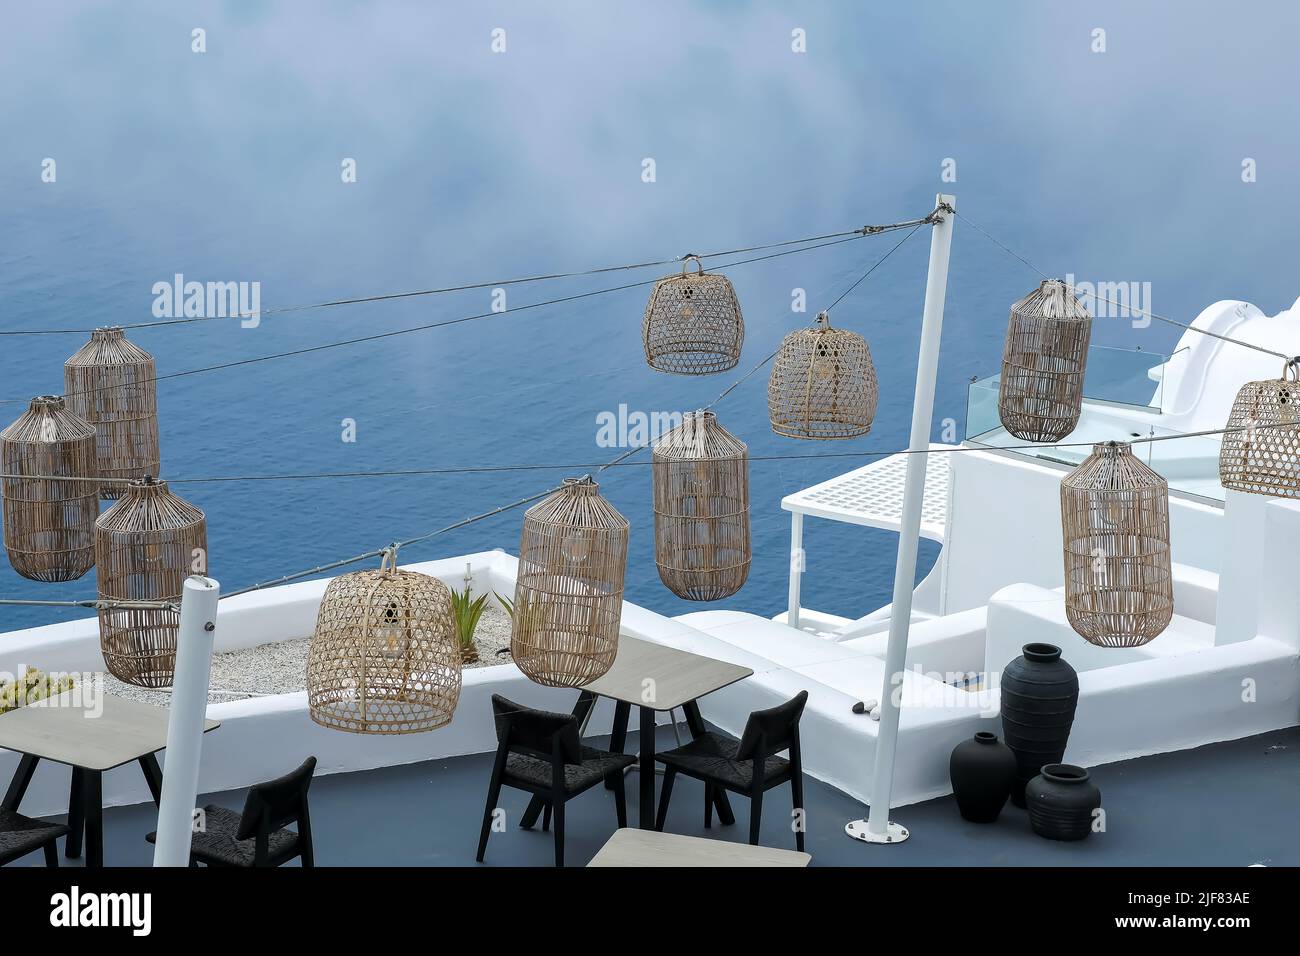 Santorini, Greece - May 13, 2021 :  View of a picturesque terrace decorated with tables, chairs  and lights overlooking the Aegean Sea Stock Photo